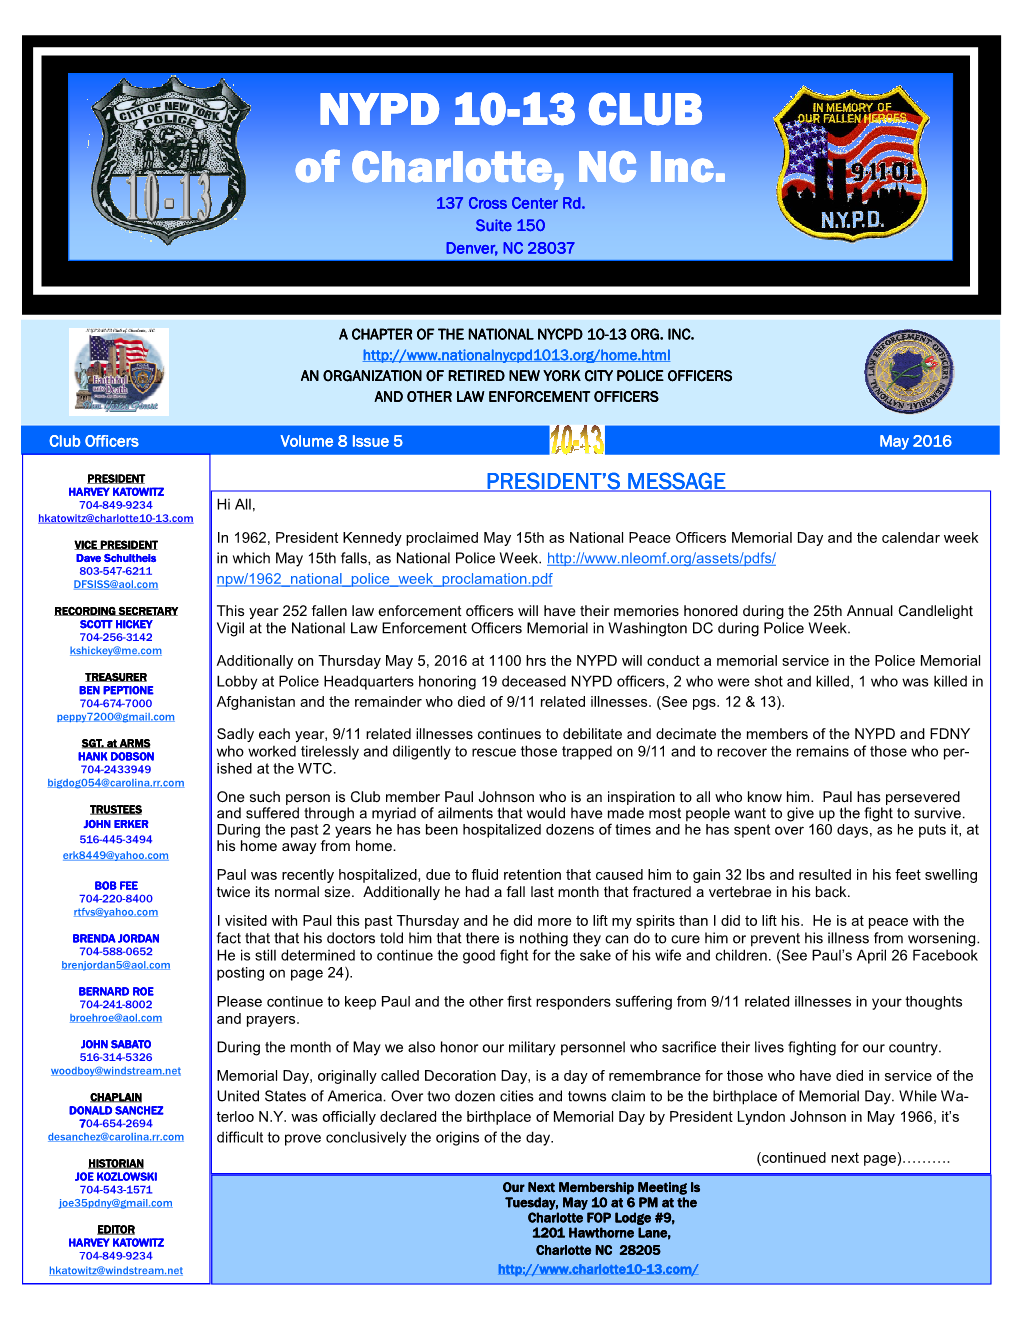 May 2016 10-13 Club of Charlotte Newsletter